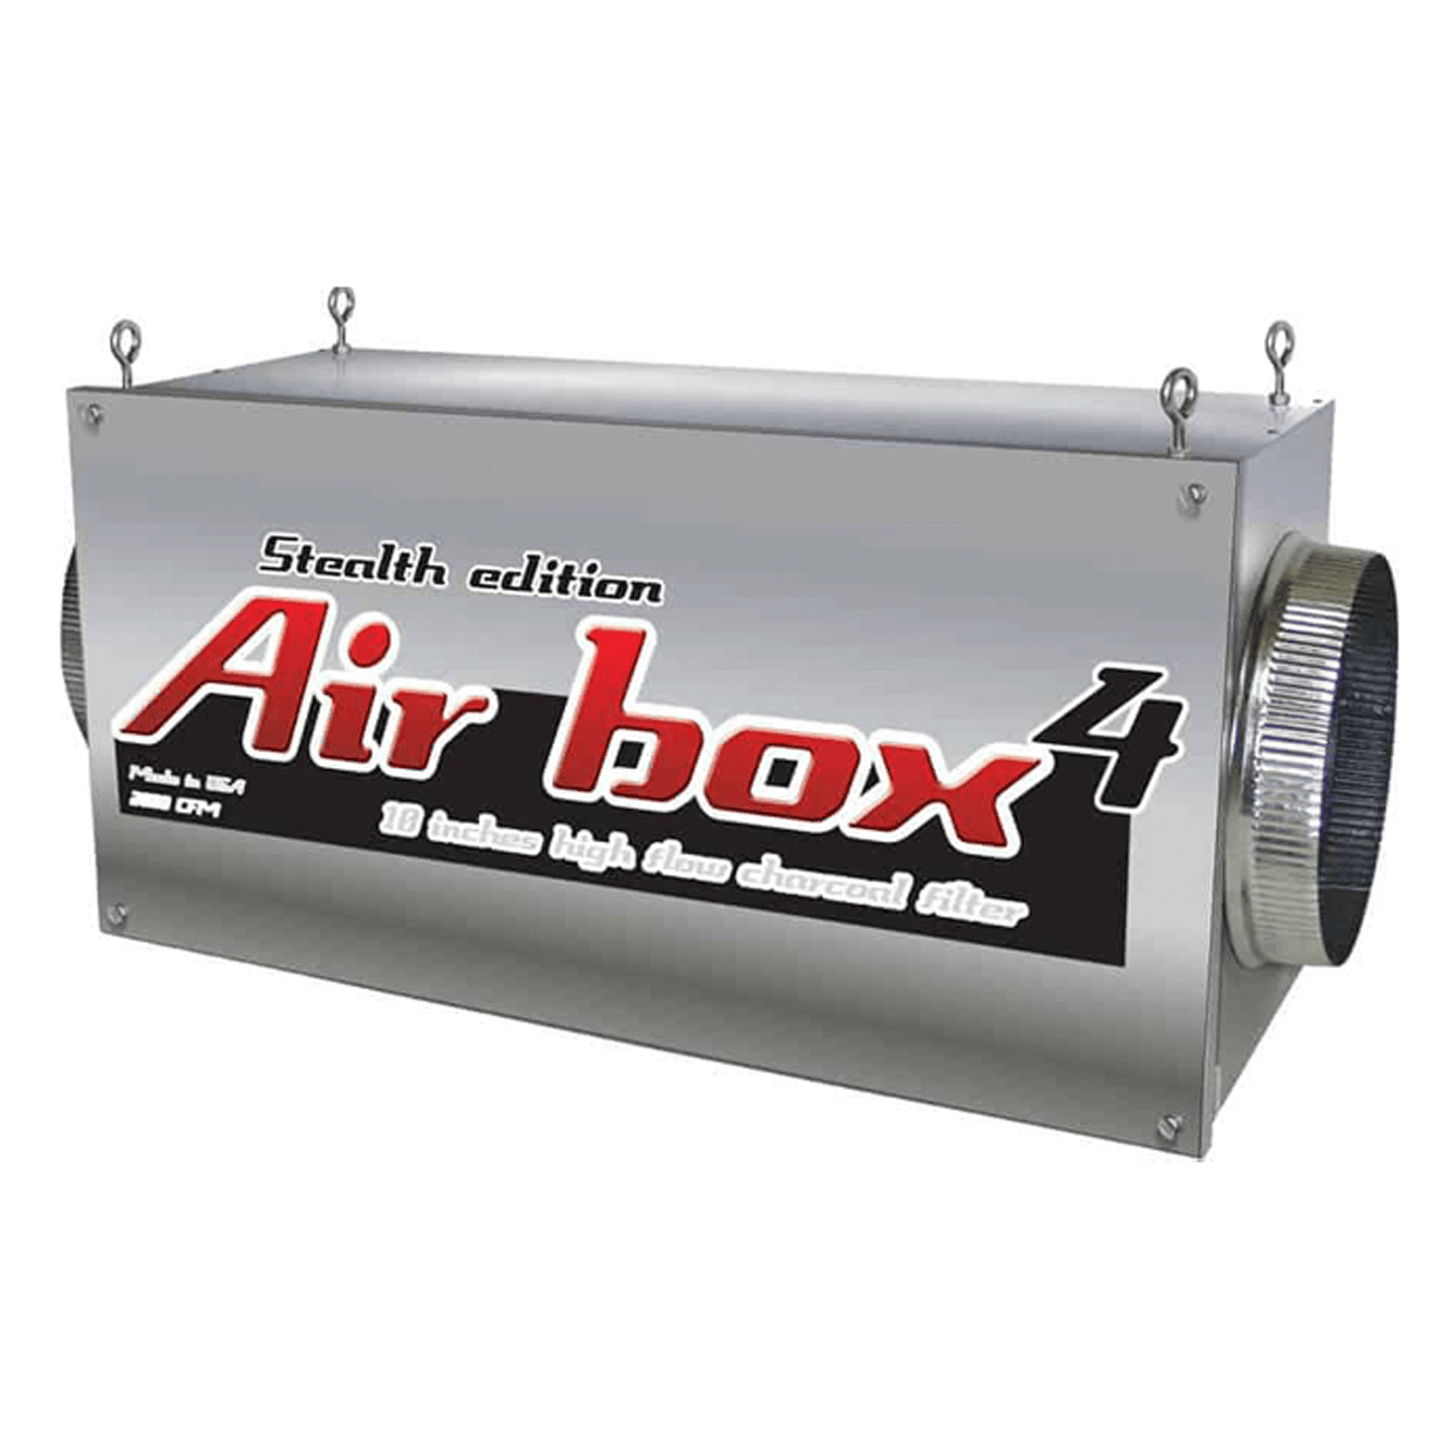 Air Box 4 Stealth Edition 10" Carbon Filter HT4716 Climate Control 816731012973